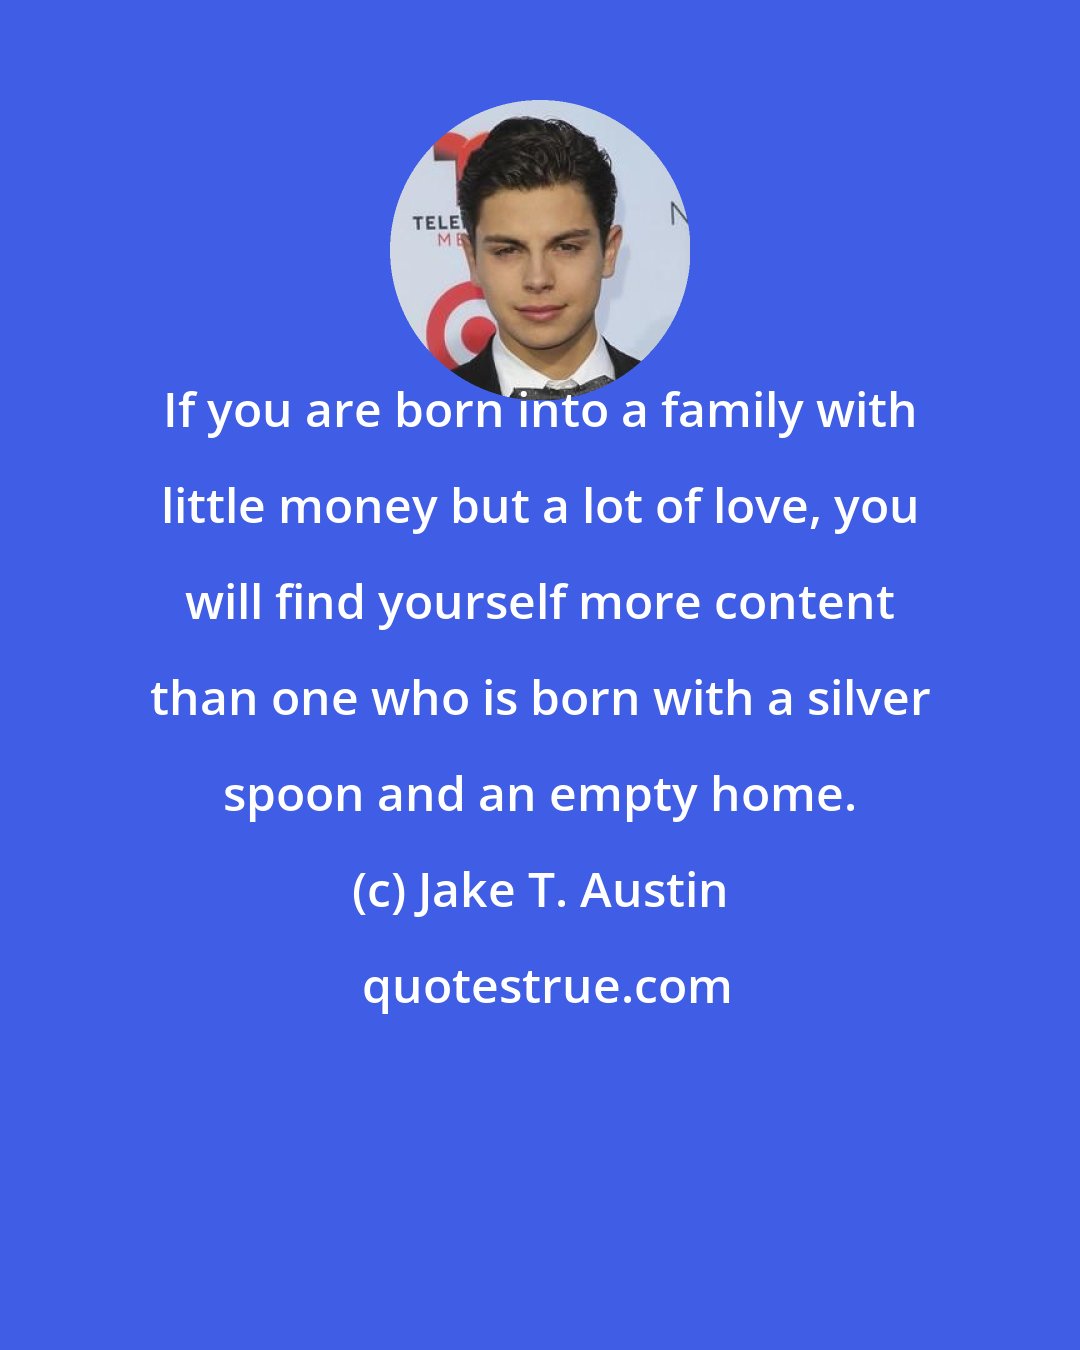 Jake T. Austin: If you are born into a family with little money but a lot of love, you will find yourself more content than one who is born with a silver spoon and an empty home.